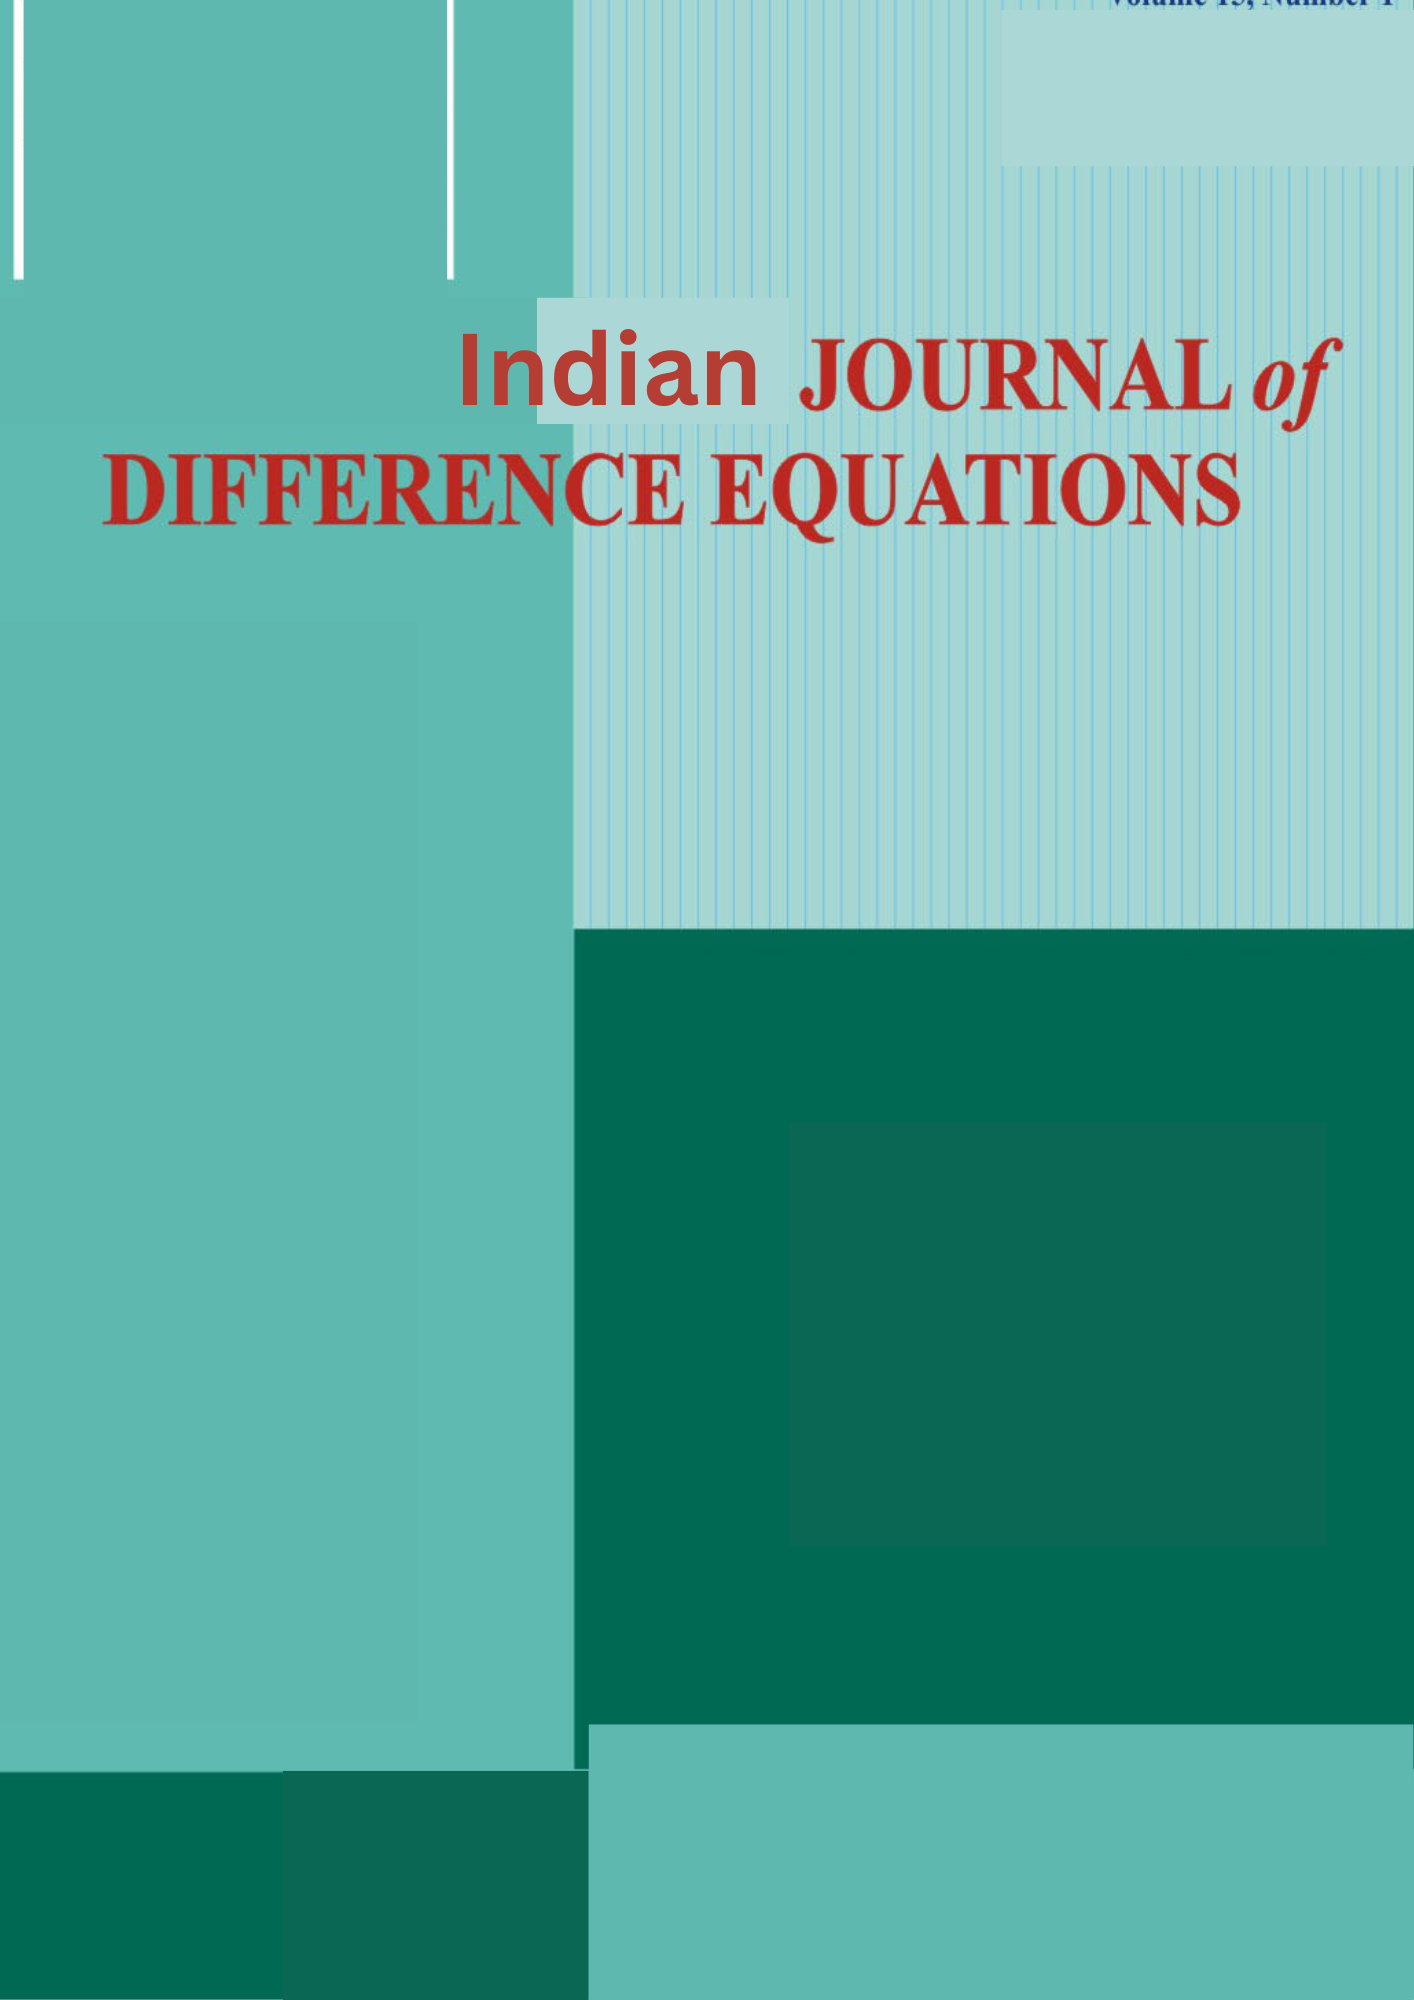 Indian Journal of Difference Equations